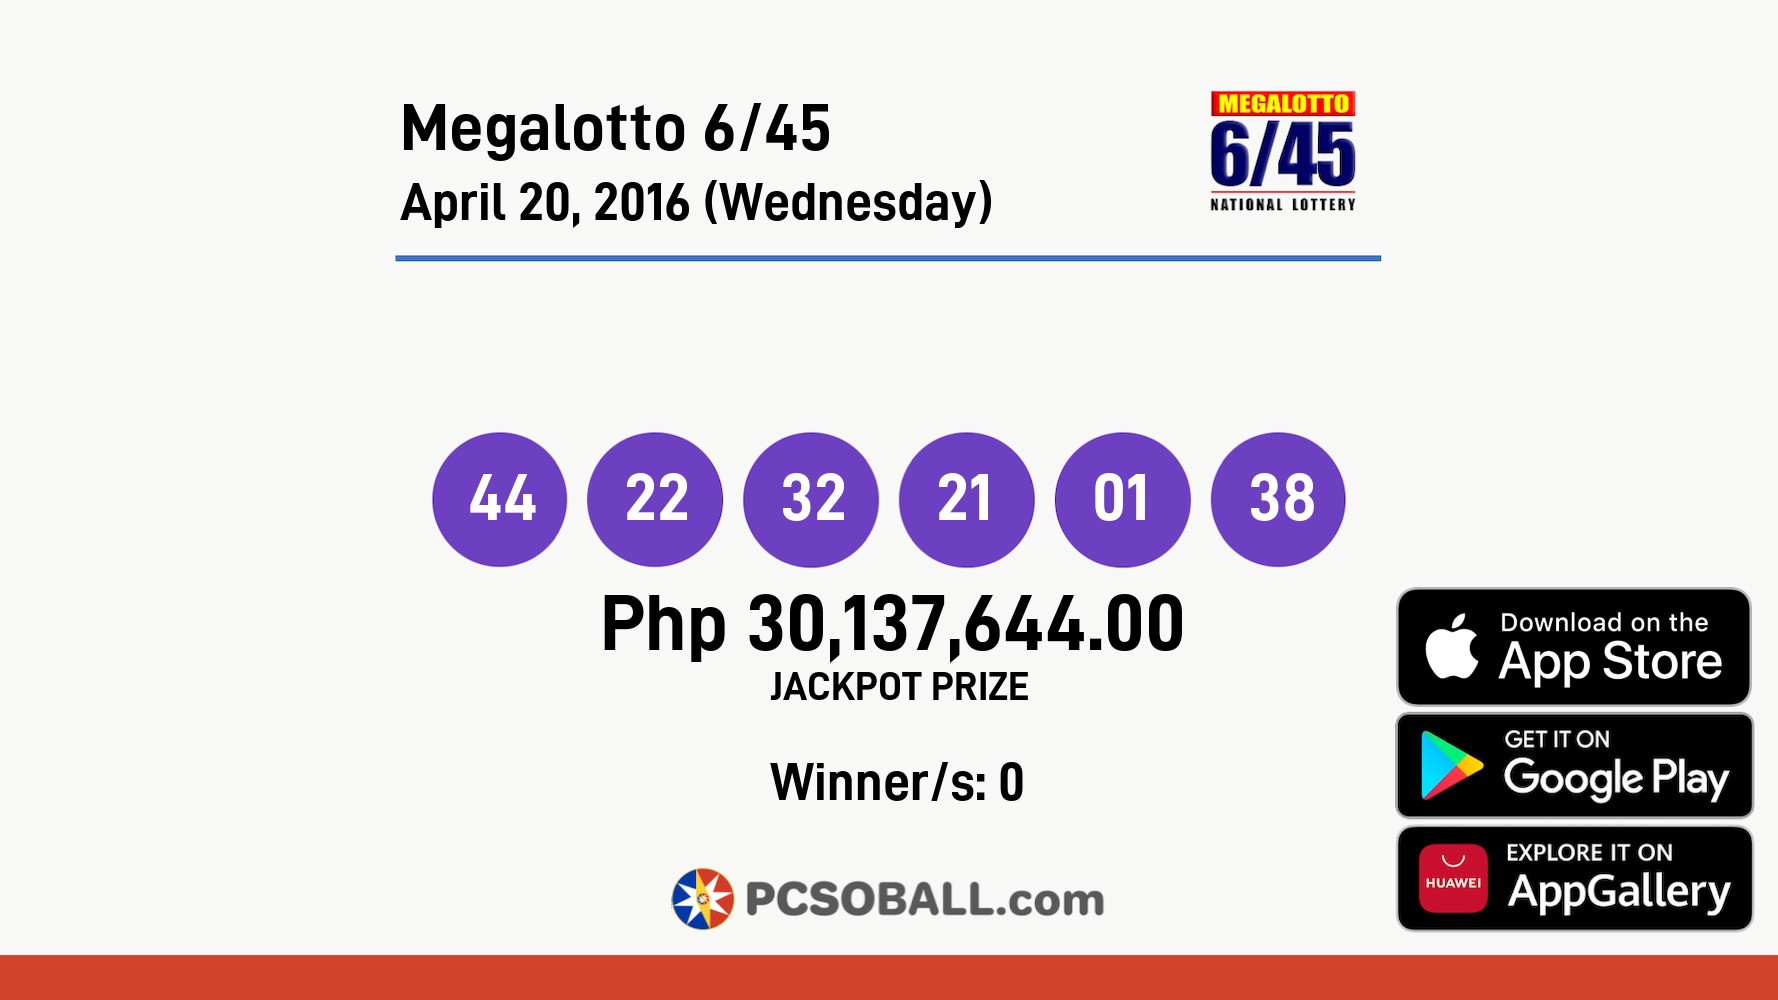 Megalotto 6/45 April 20, 2016 (Wednesday) Result